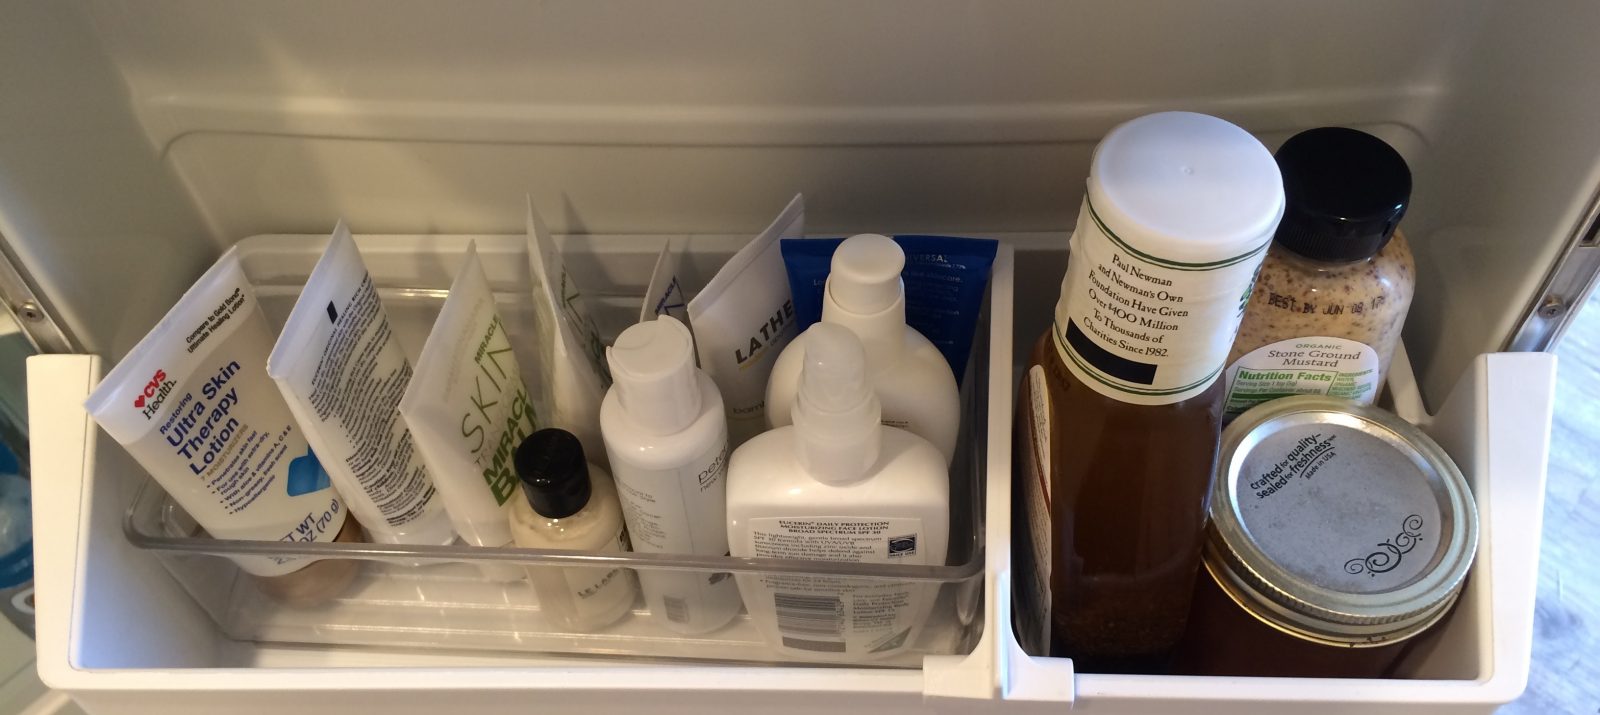 beauty storage ideas and solutions: store skin care in fridge